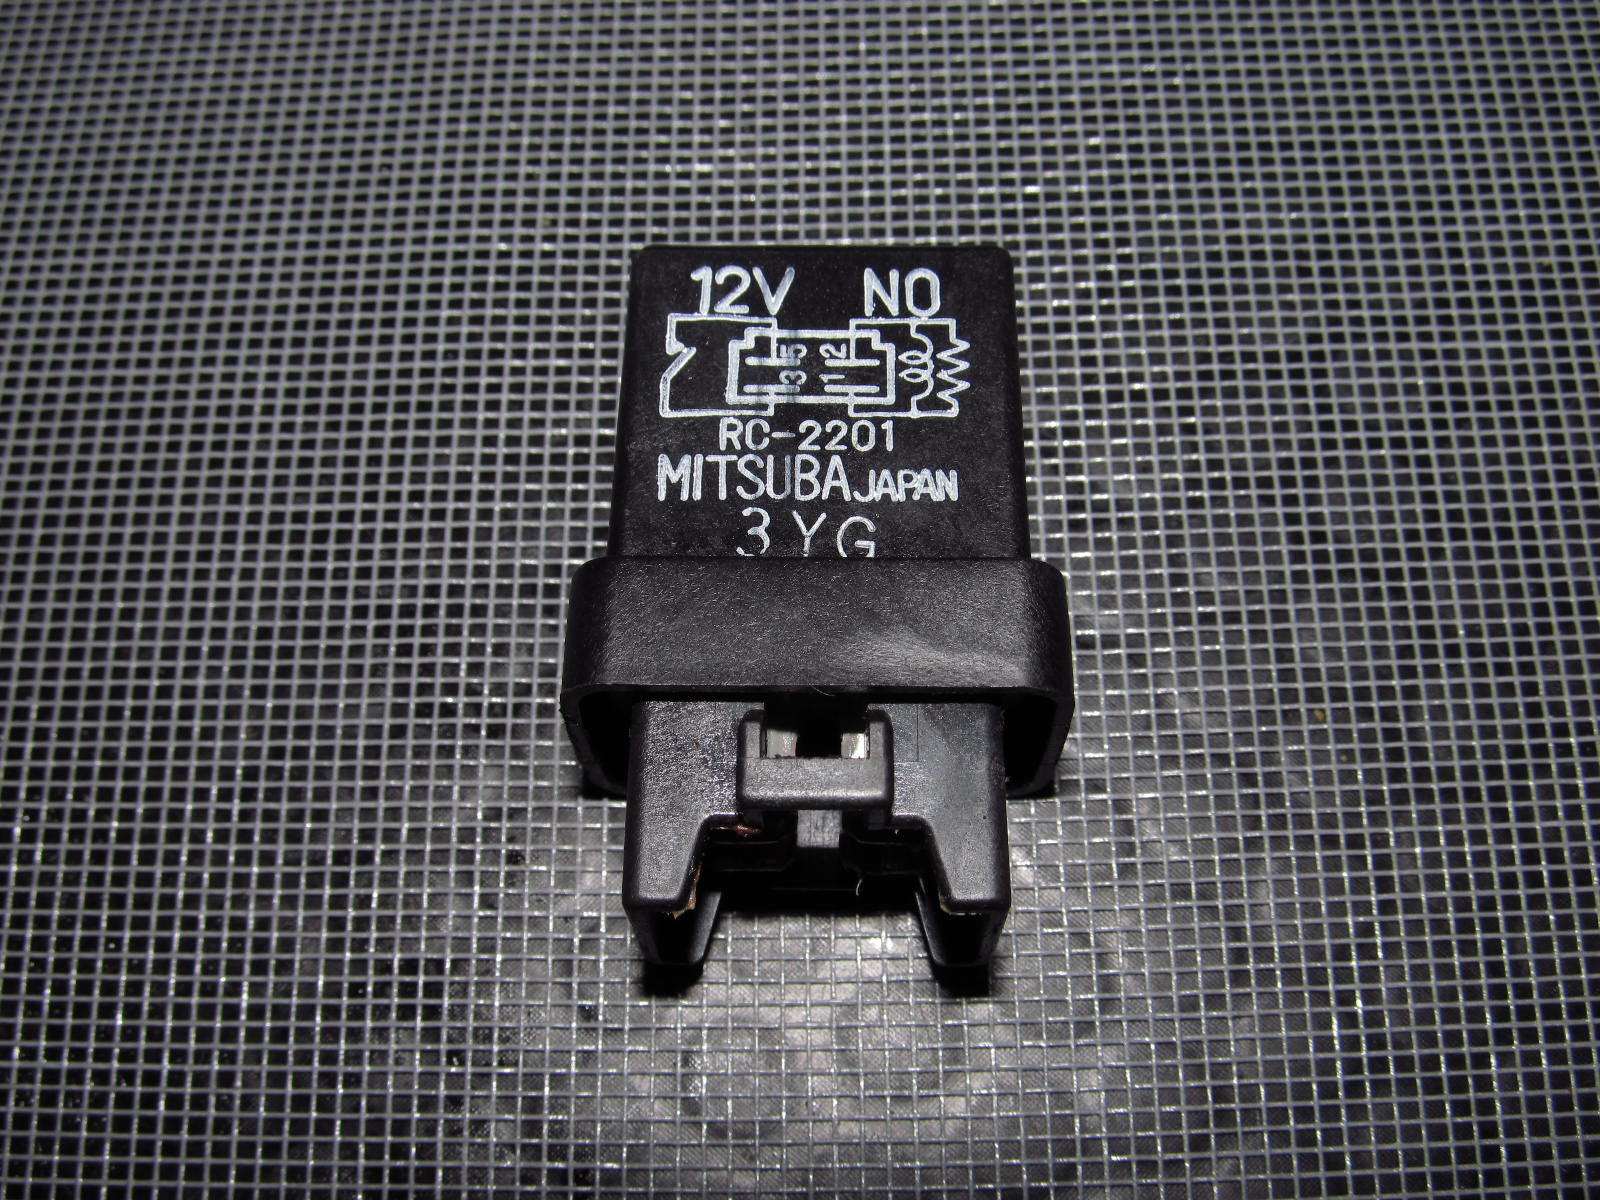 Honda & Acura Universal Relay RC-2201 with Harness 2 pieces